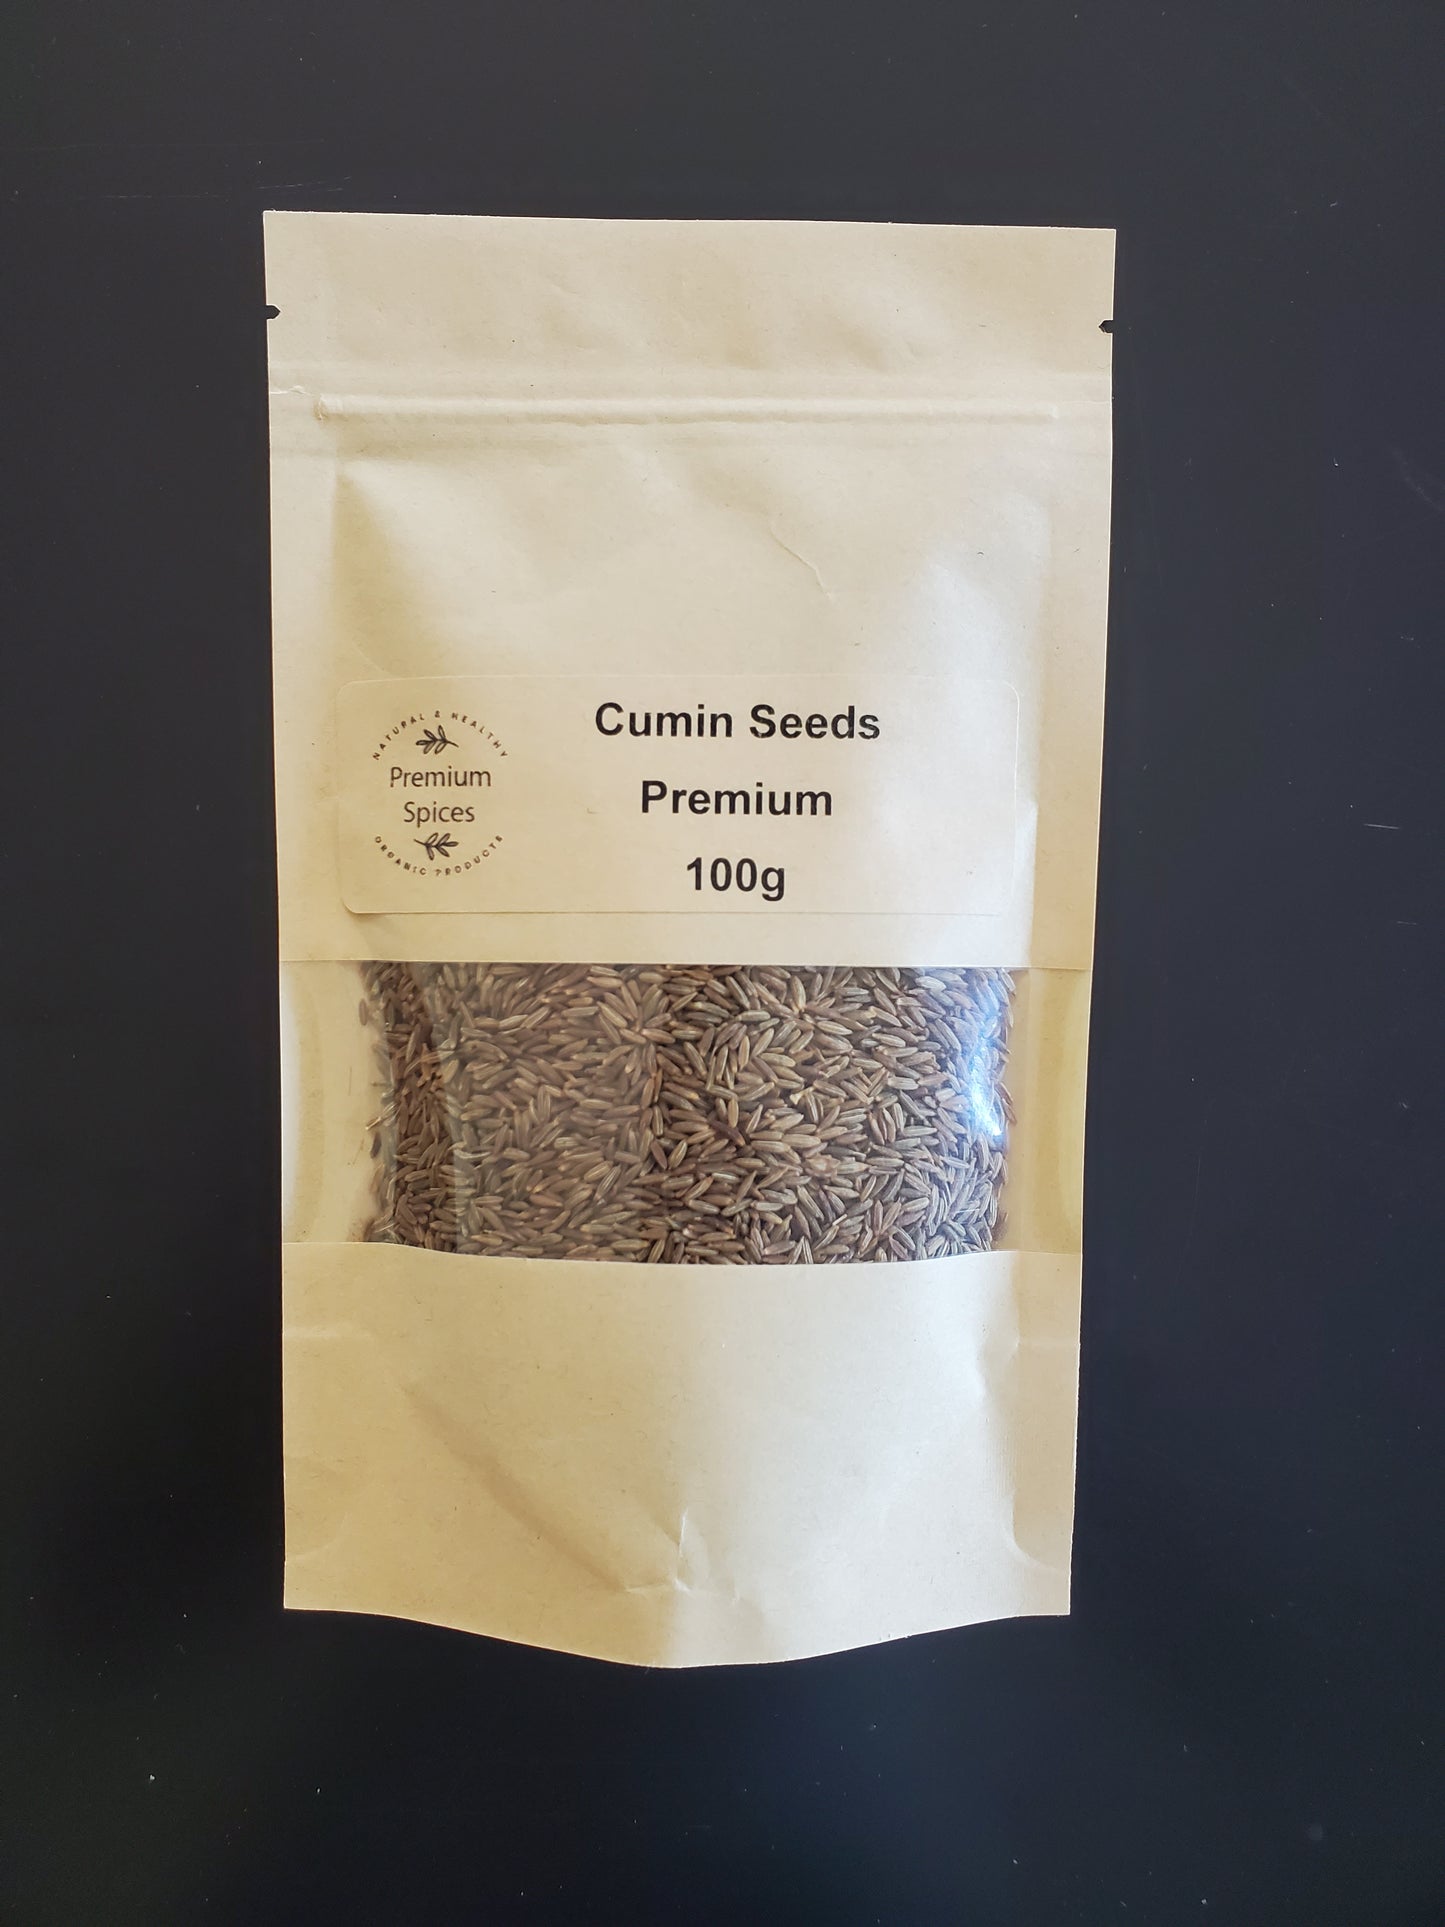 Cumin Seeds in NZ - Showing 100g eco friendly packing